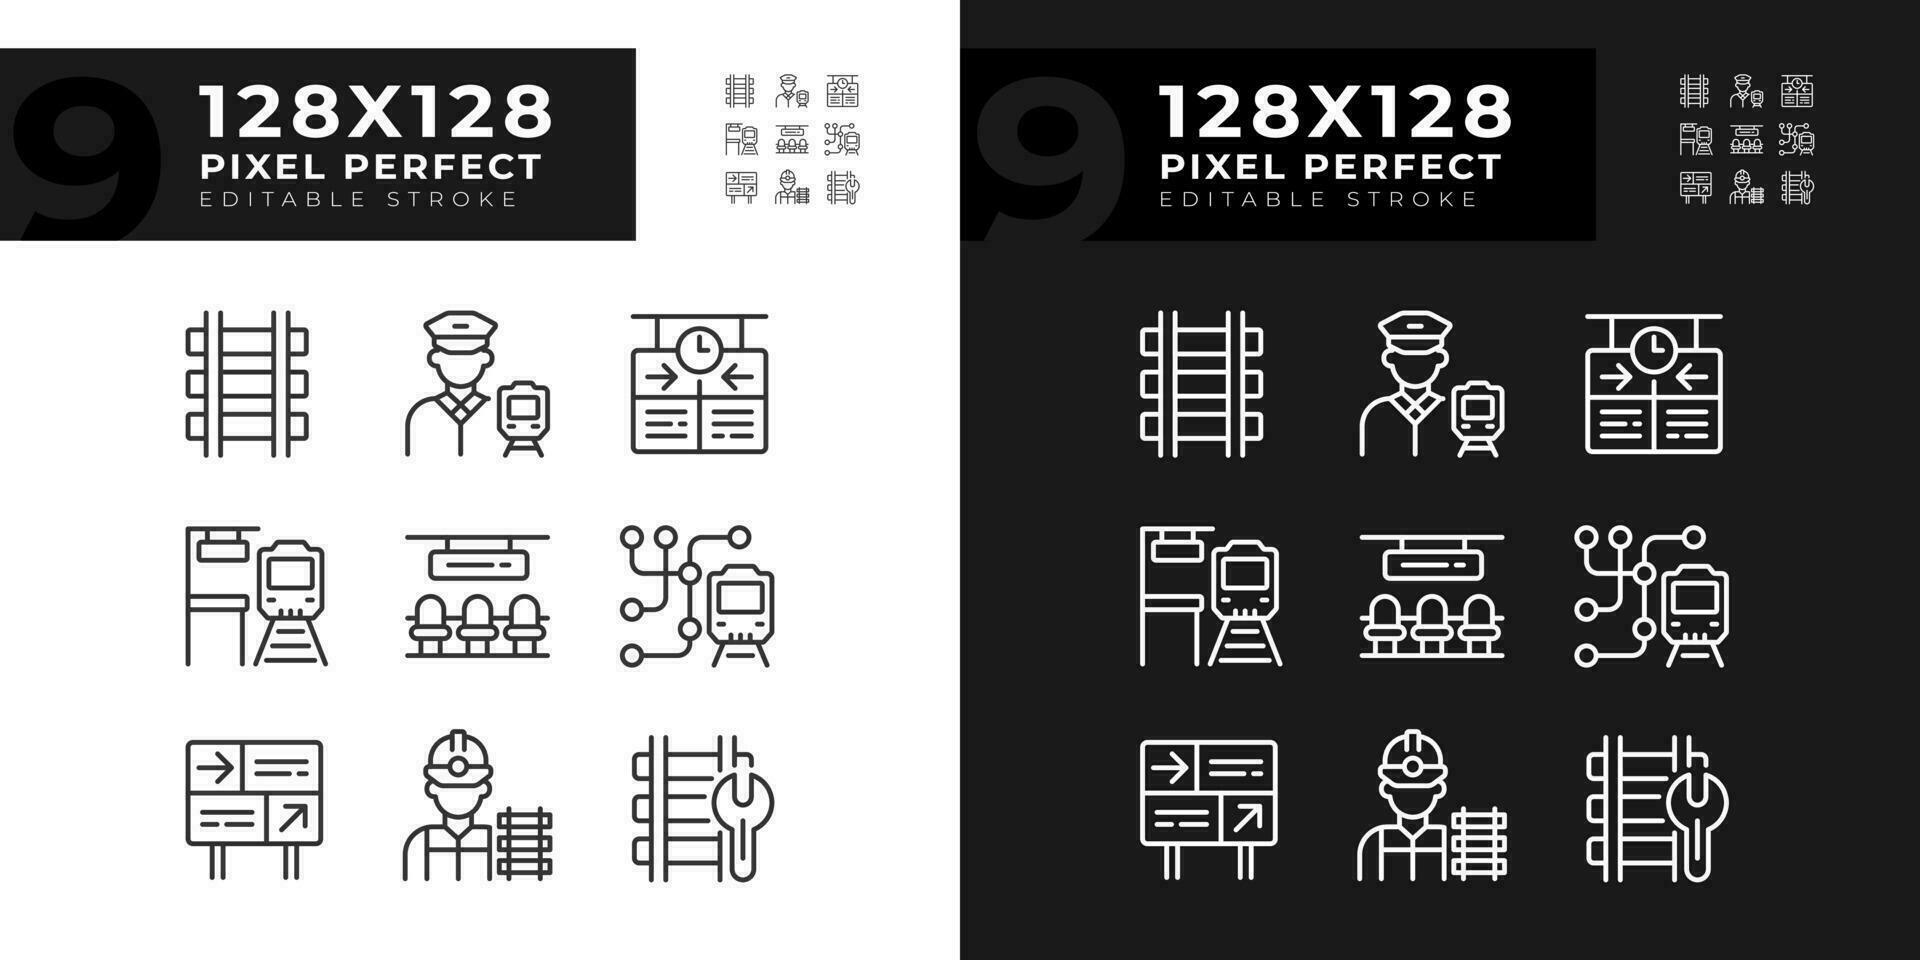 Railroad industry pixel perfect linear icons set for dark, light mode. Railway station. Passenger rail. Rapid transit. Thin line symbols for night, day theme. Isolated illustrations. Editable stroke vector